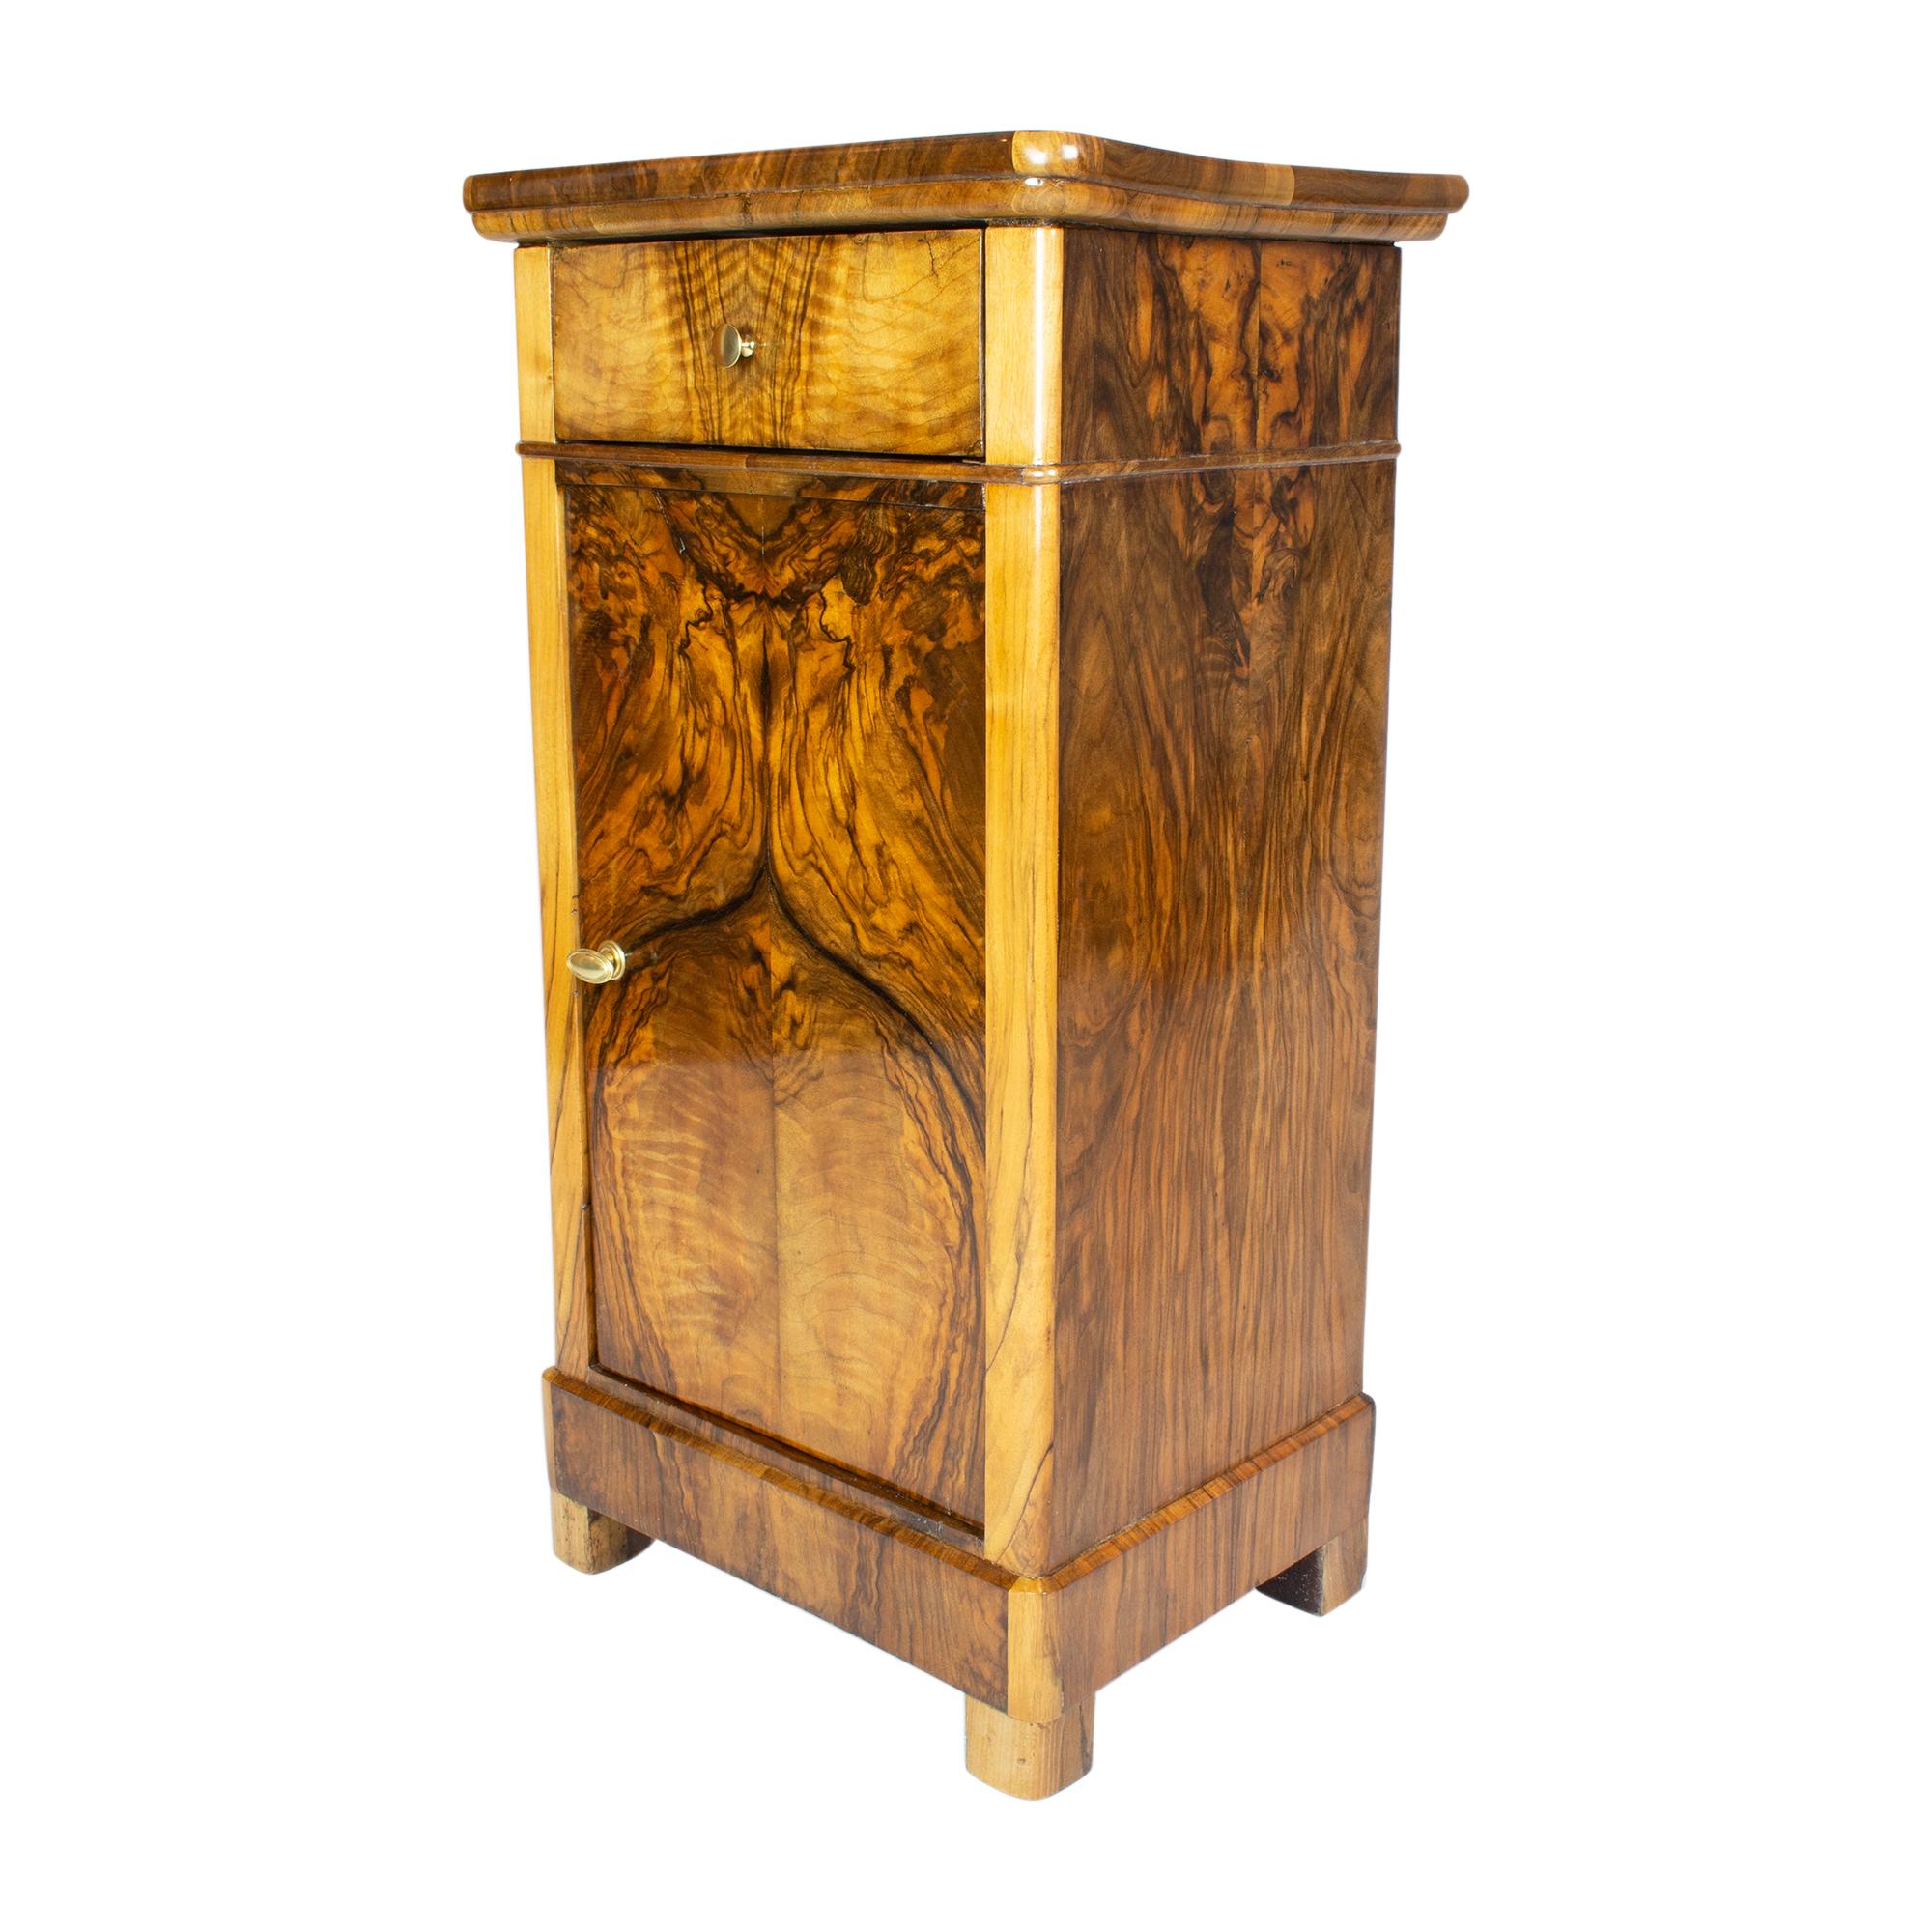 Beautiful Biedermeier walnut veneer nightstand or pillar cabinet from Germany. Back and shelf is made of spruce wood as usual. The opening handles are made of brass. There is a drawer at the top and a door below. The furniture is in a very good,